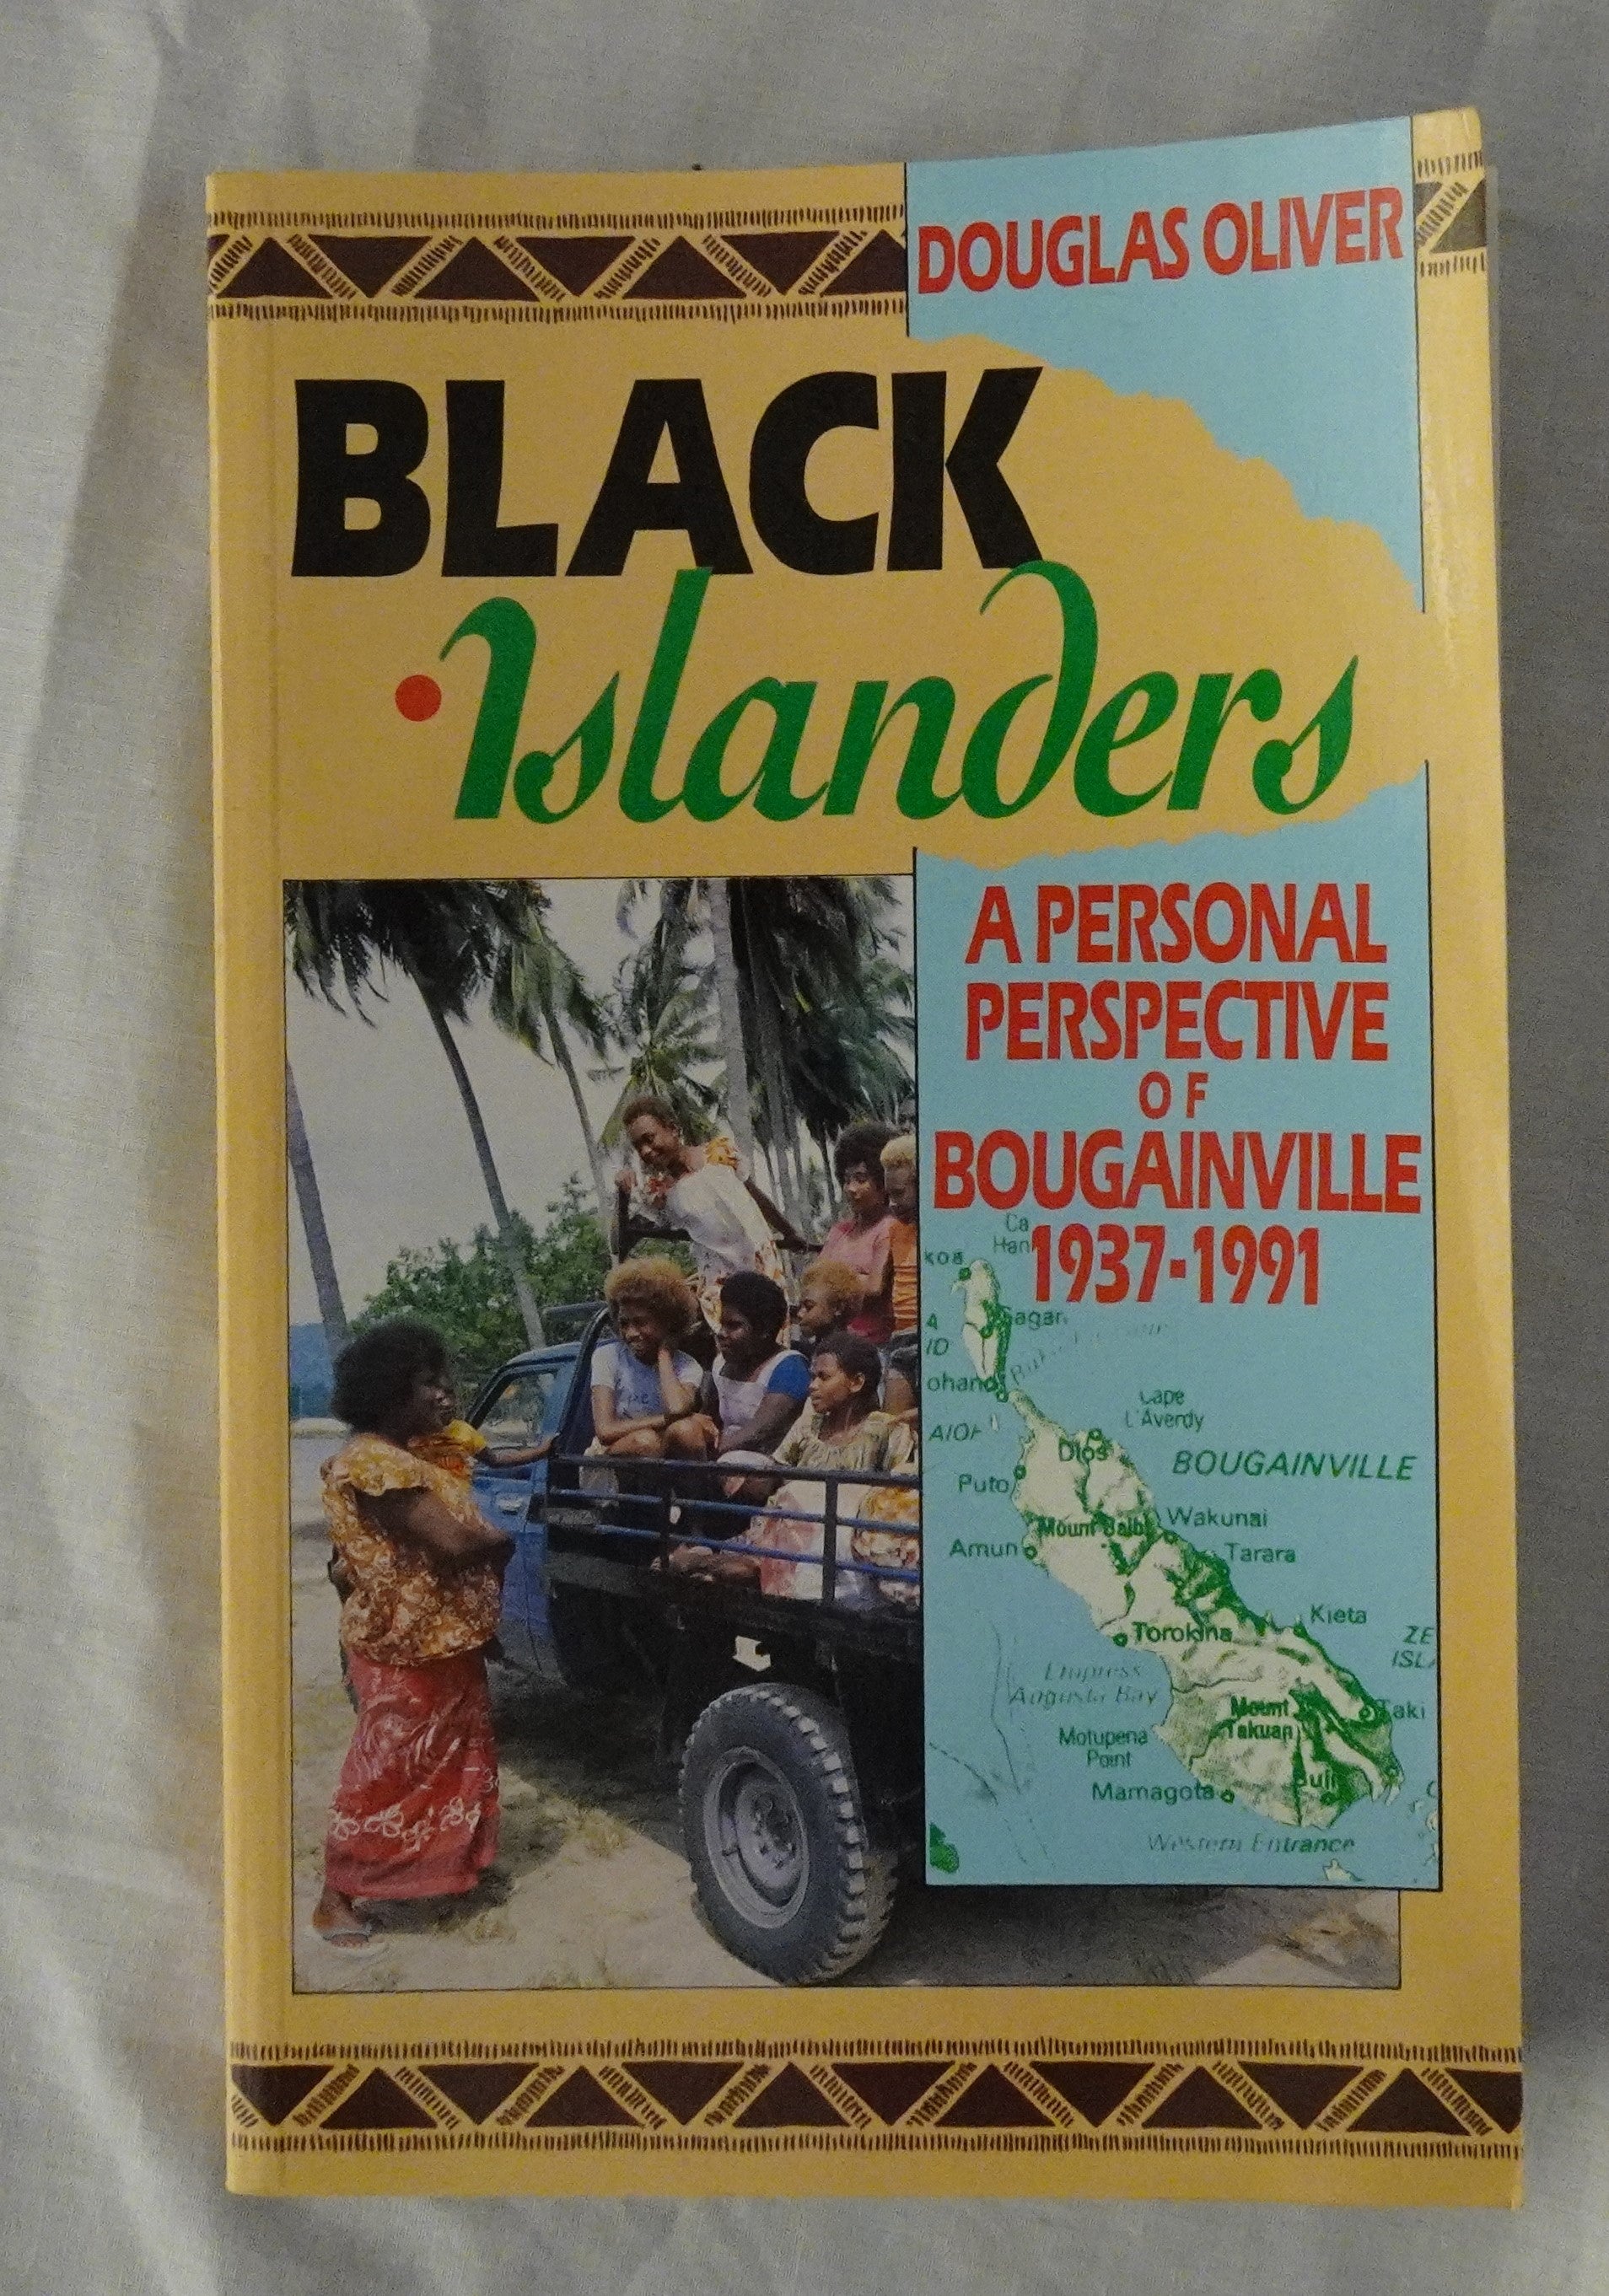 Black Islanders  A Personal Perspective of Bougainville 1937-1991  by Douglas Oliver